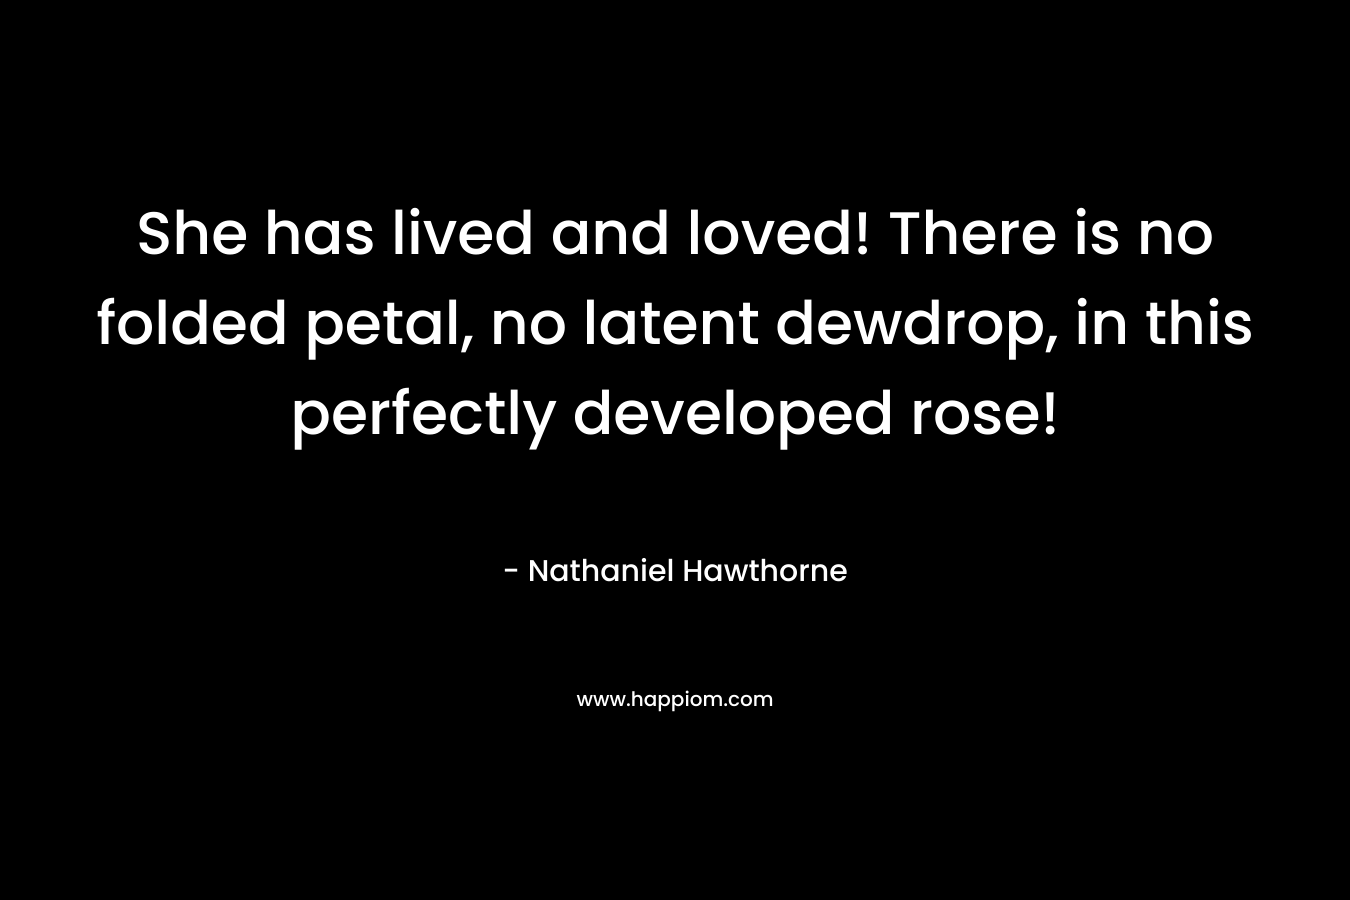 She has lived and loved! There is no folded petal, no latent dewdrop, in this perfectly developed rose! – Nathaniel Hawthorne